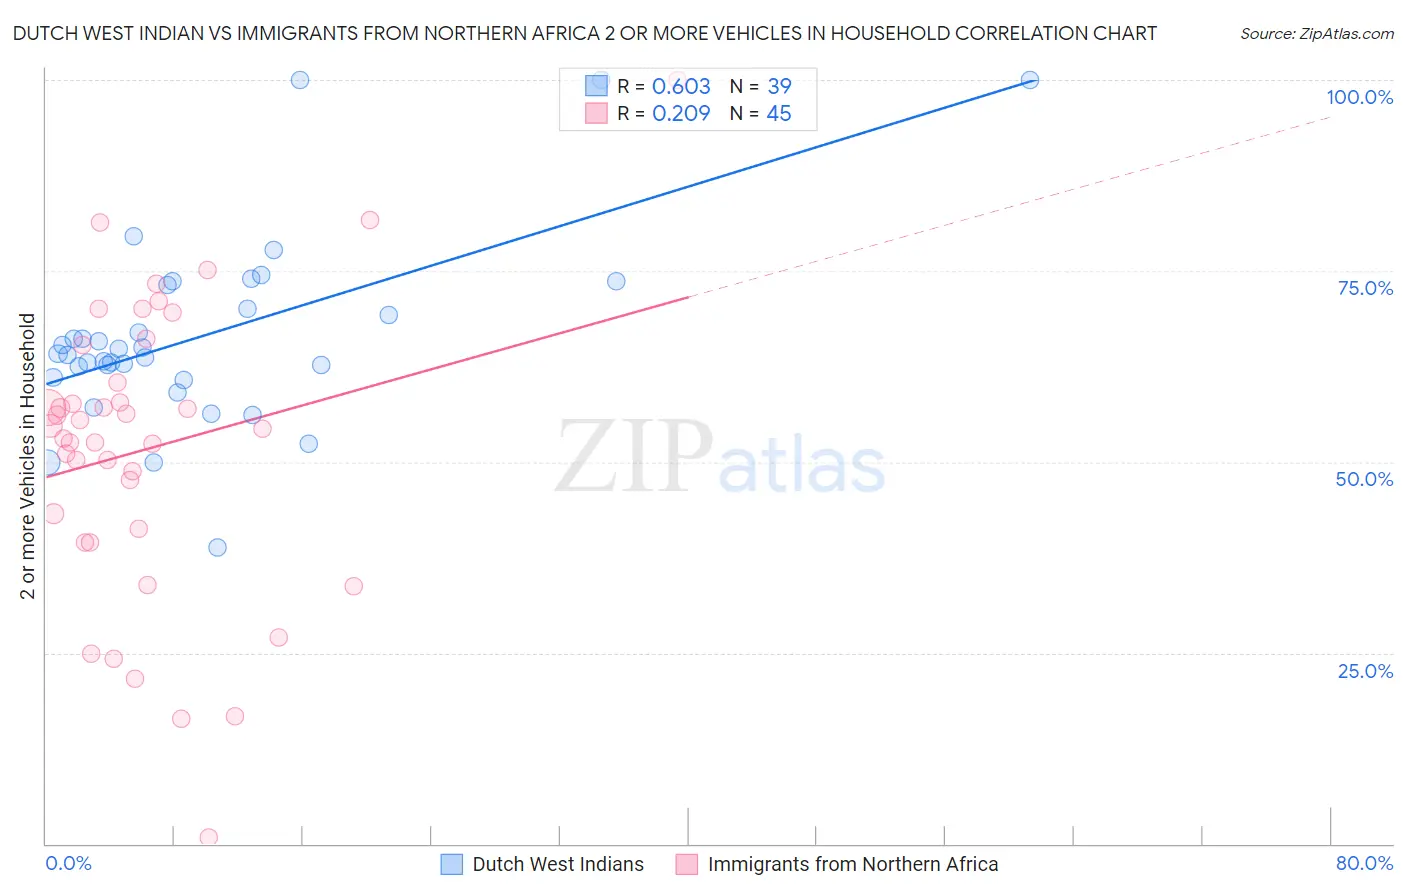 Dutch West Indian vs Immigrants from Northern Africa 2 or more Vehicles in Household